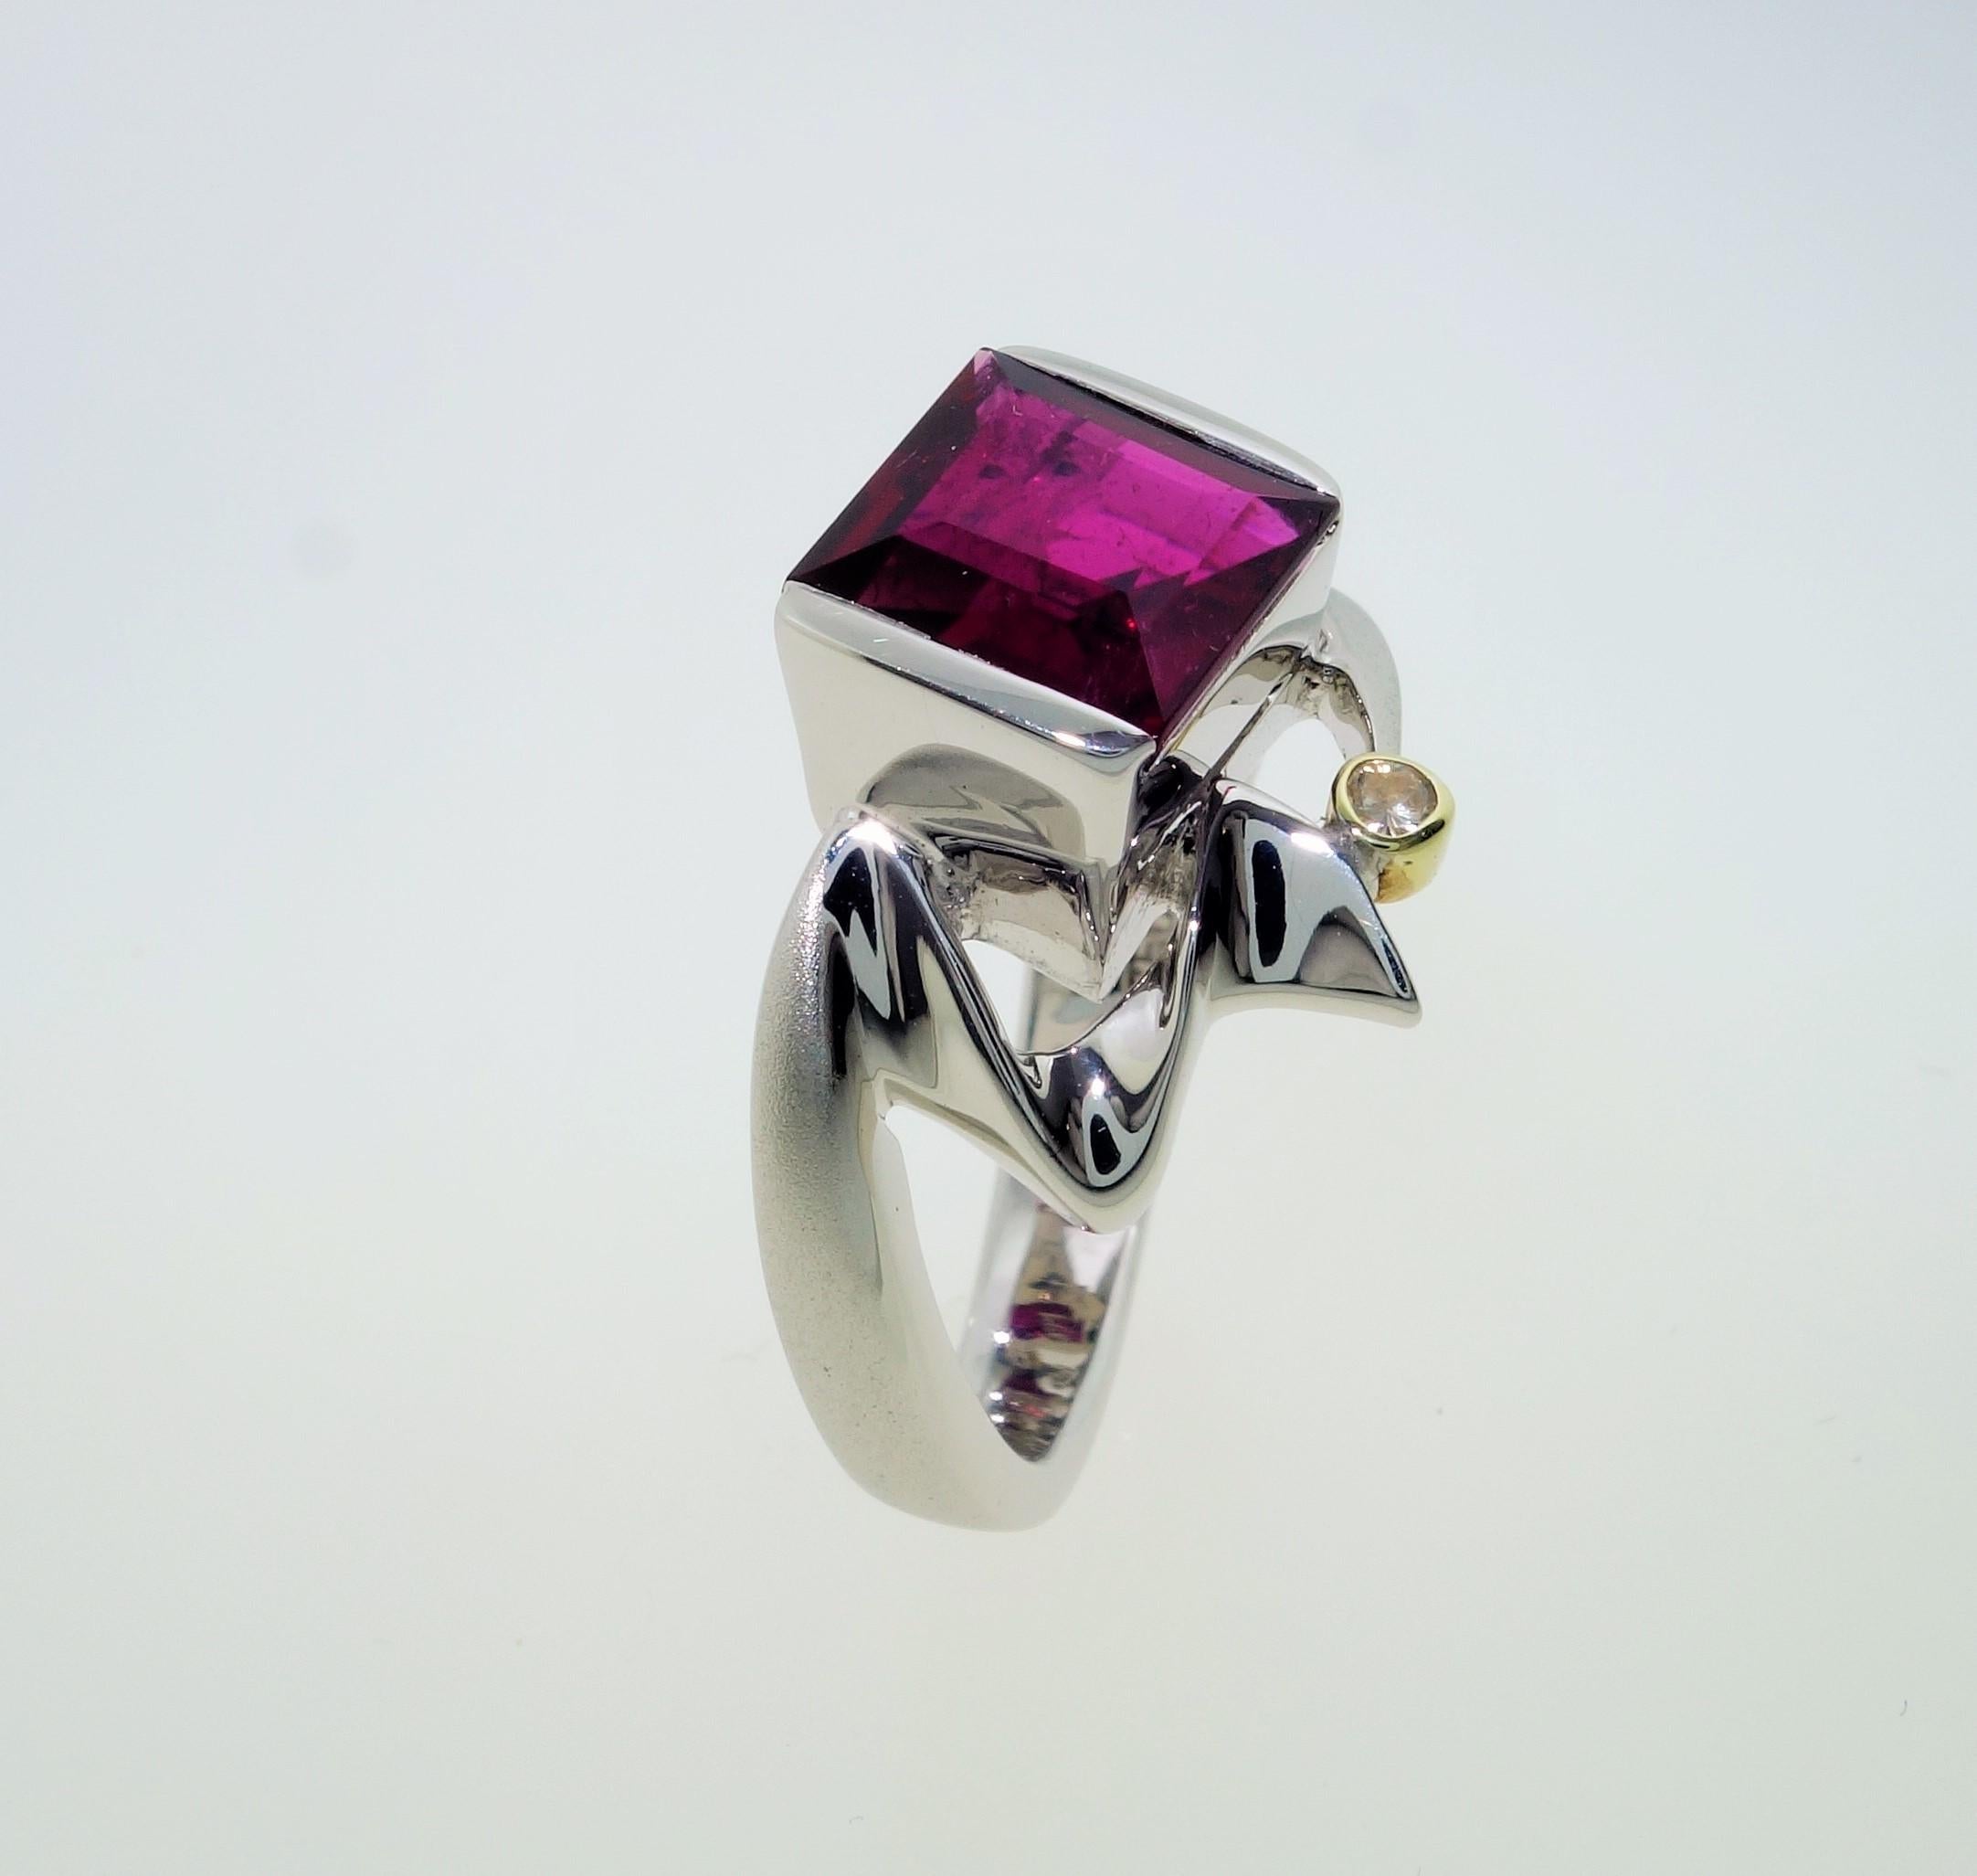 Simply Beautiful, Elegant and finely detailed Cocktail Ring, center securely set with a 2.00 Carat Rubellite Tourmaline, measuring 7.5mm x 7 mm and accented by 2 Diamonds. Hand crafted in Rhodum sterling silver and 18  Karat yellow Gold. The ring